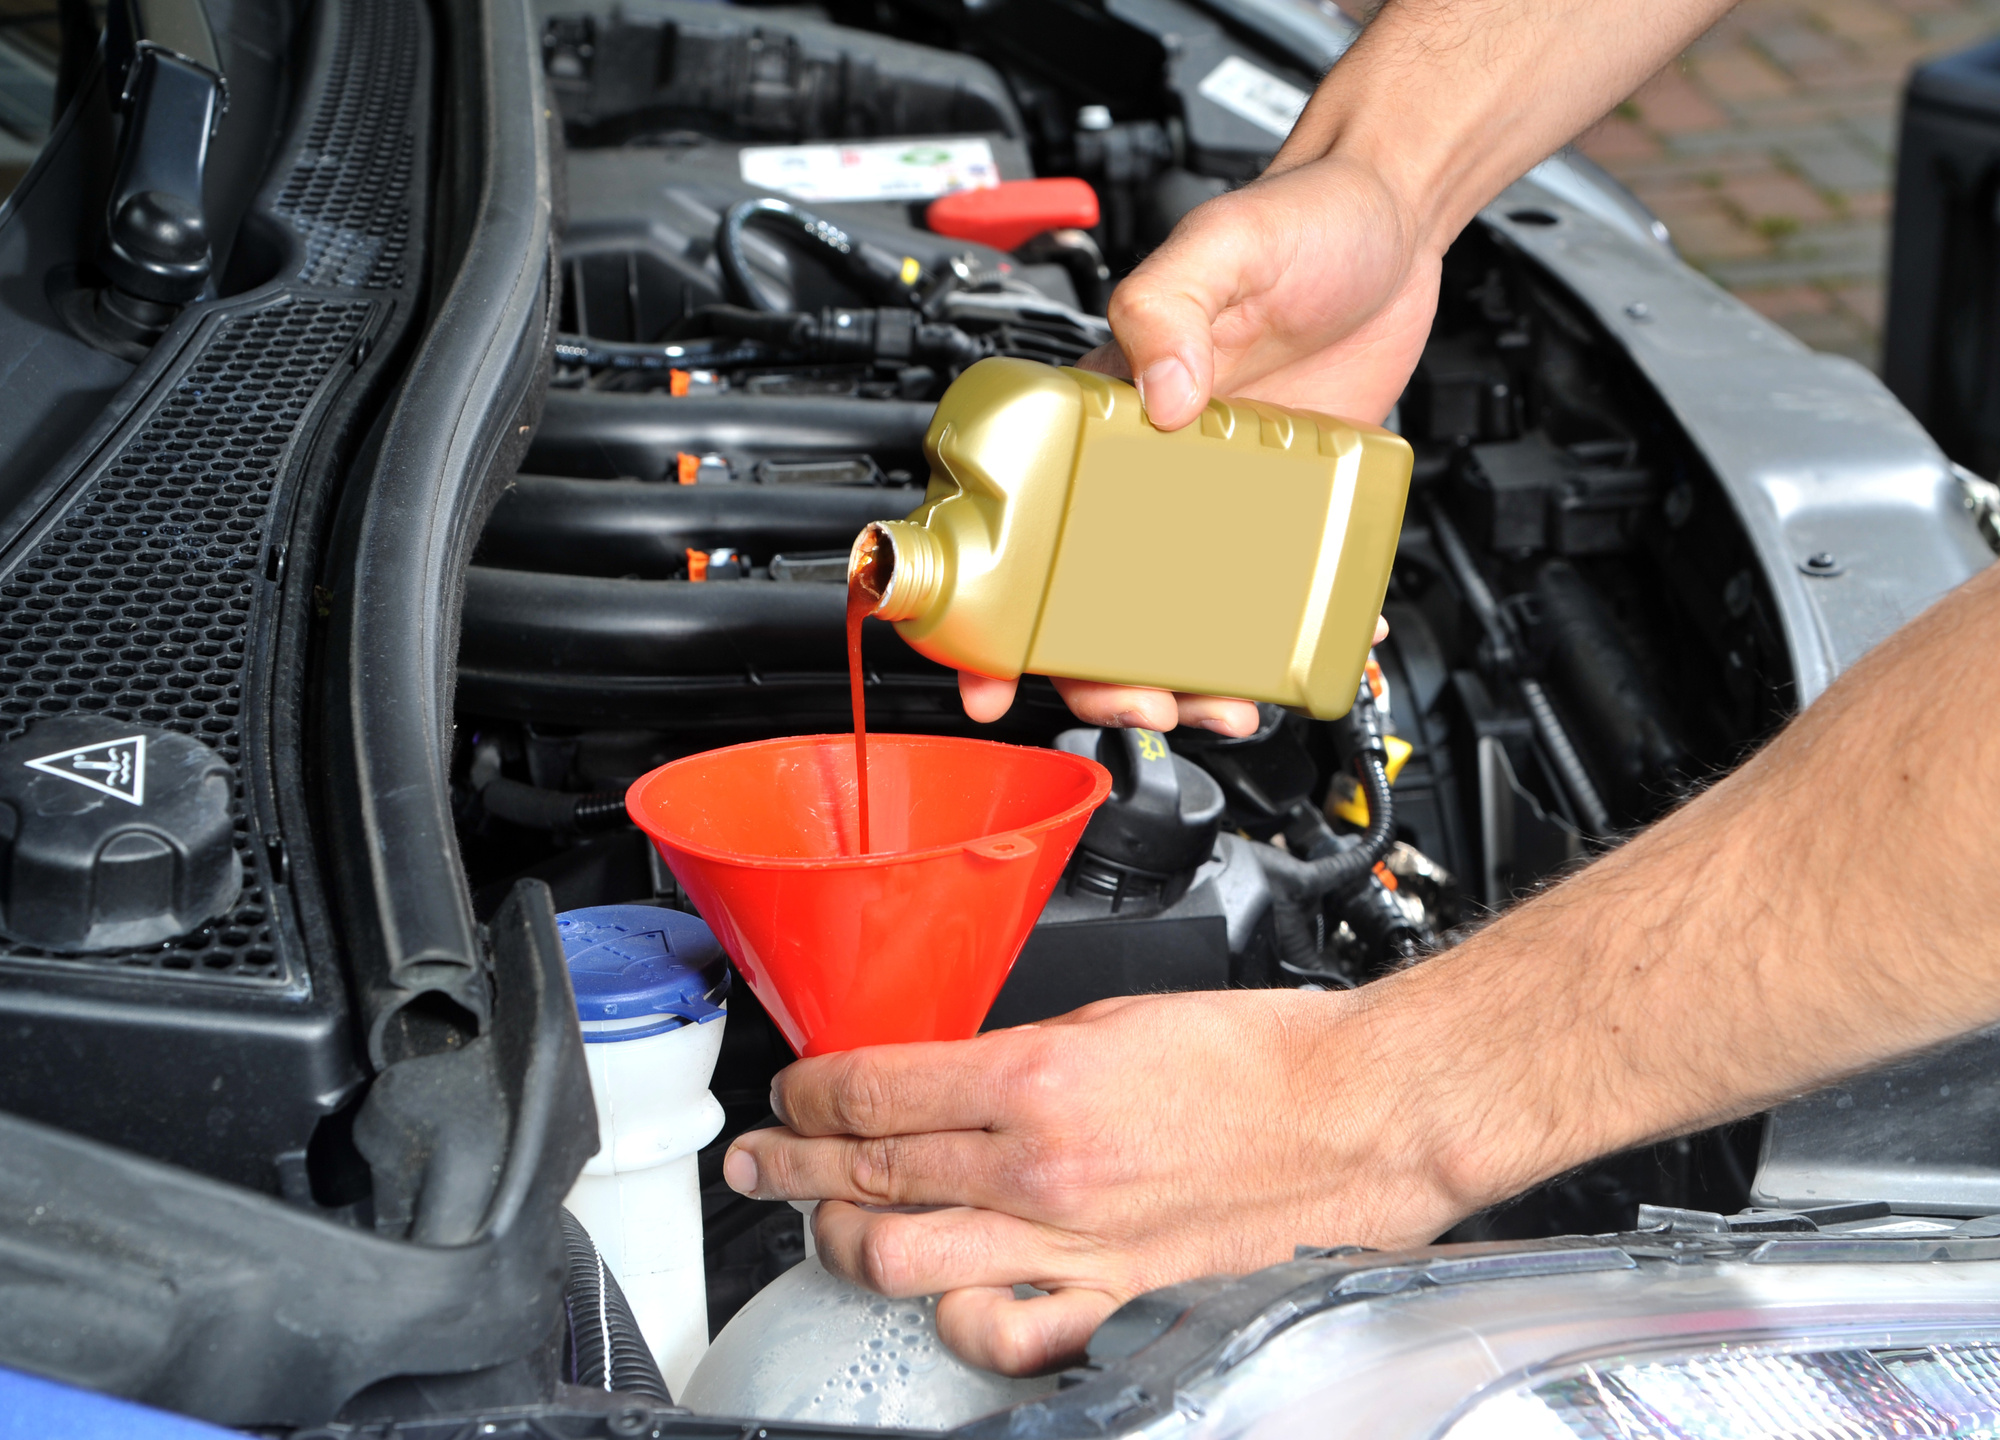 DIY or Pro? Here Are 5 Car Repairs That You Can Do Yourself! | TheUSAutoRepair.com